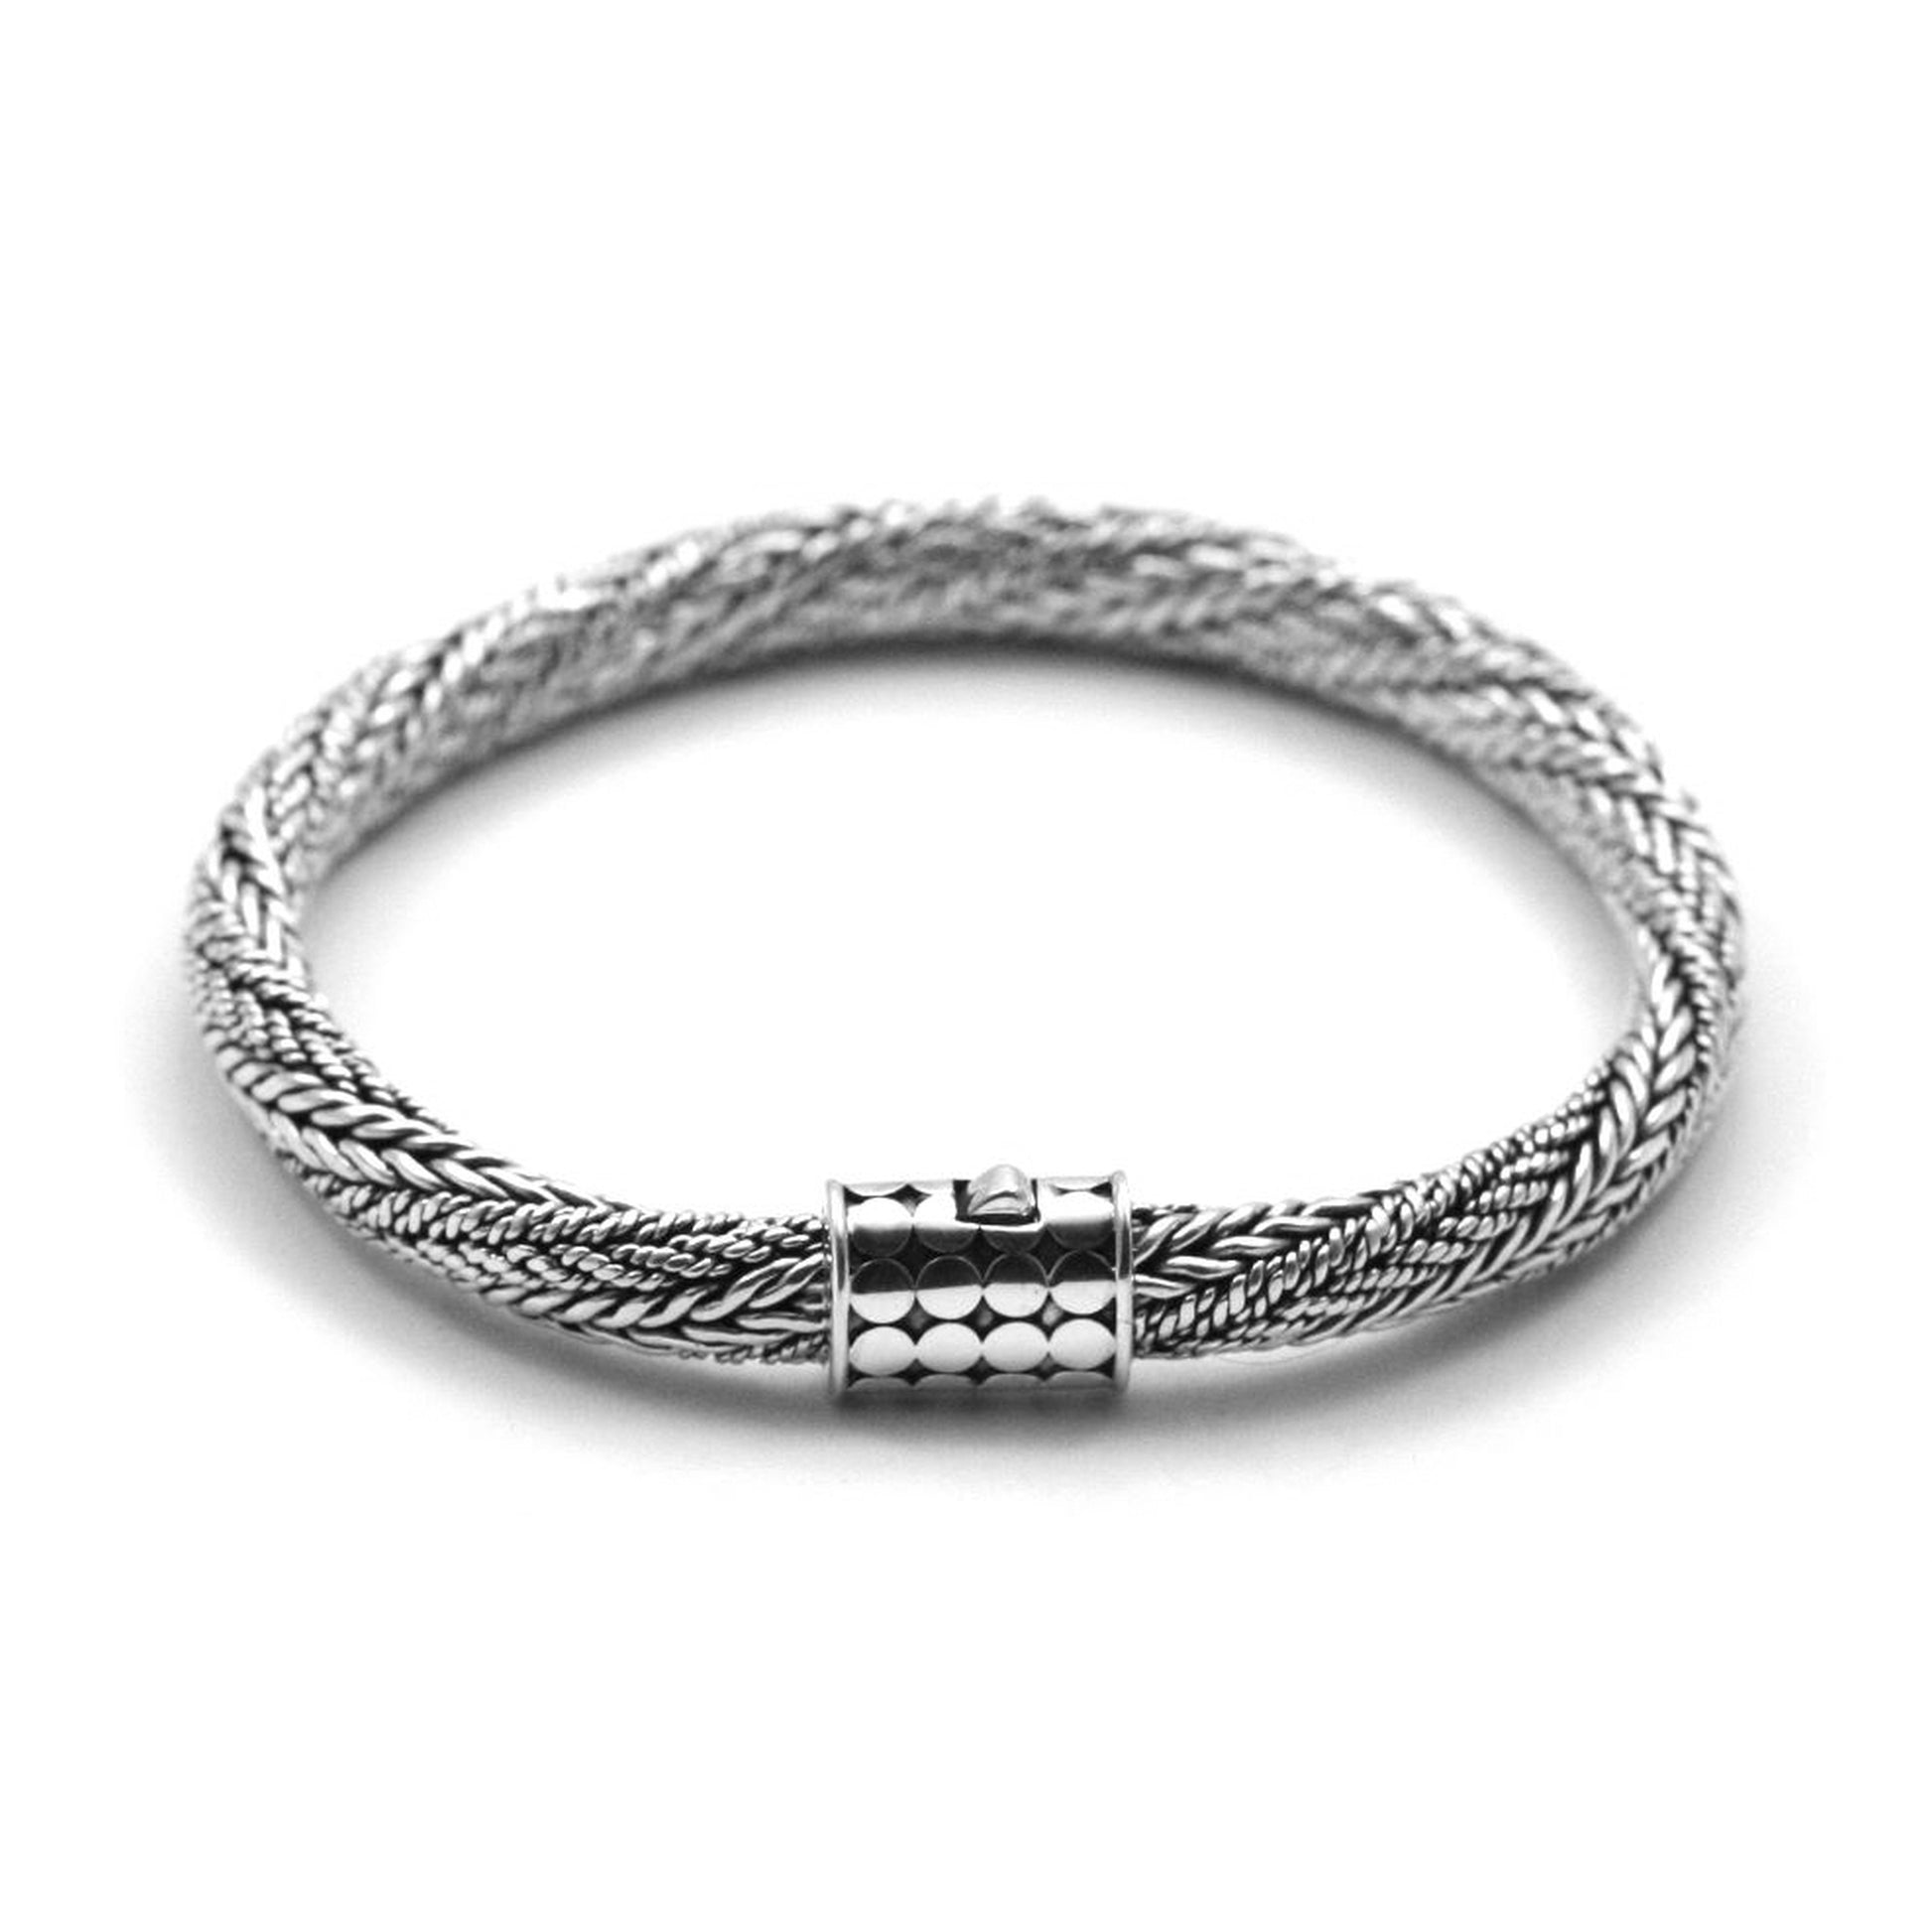 Twisted multi-textured silver chain bracelet with a decorated barrel clasp.